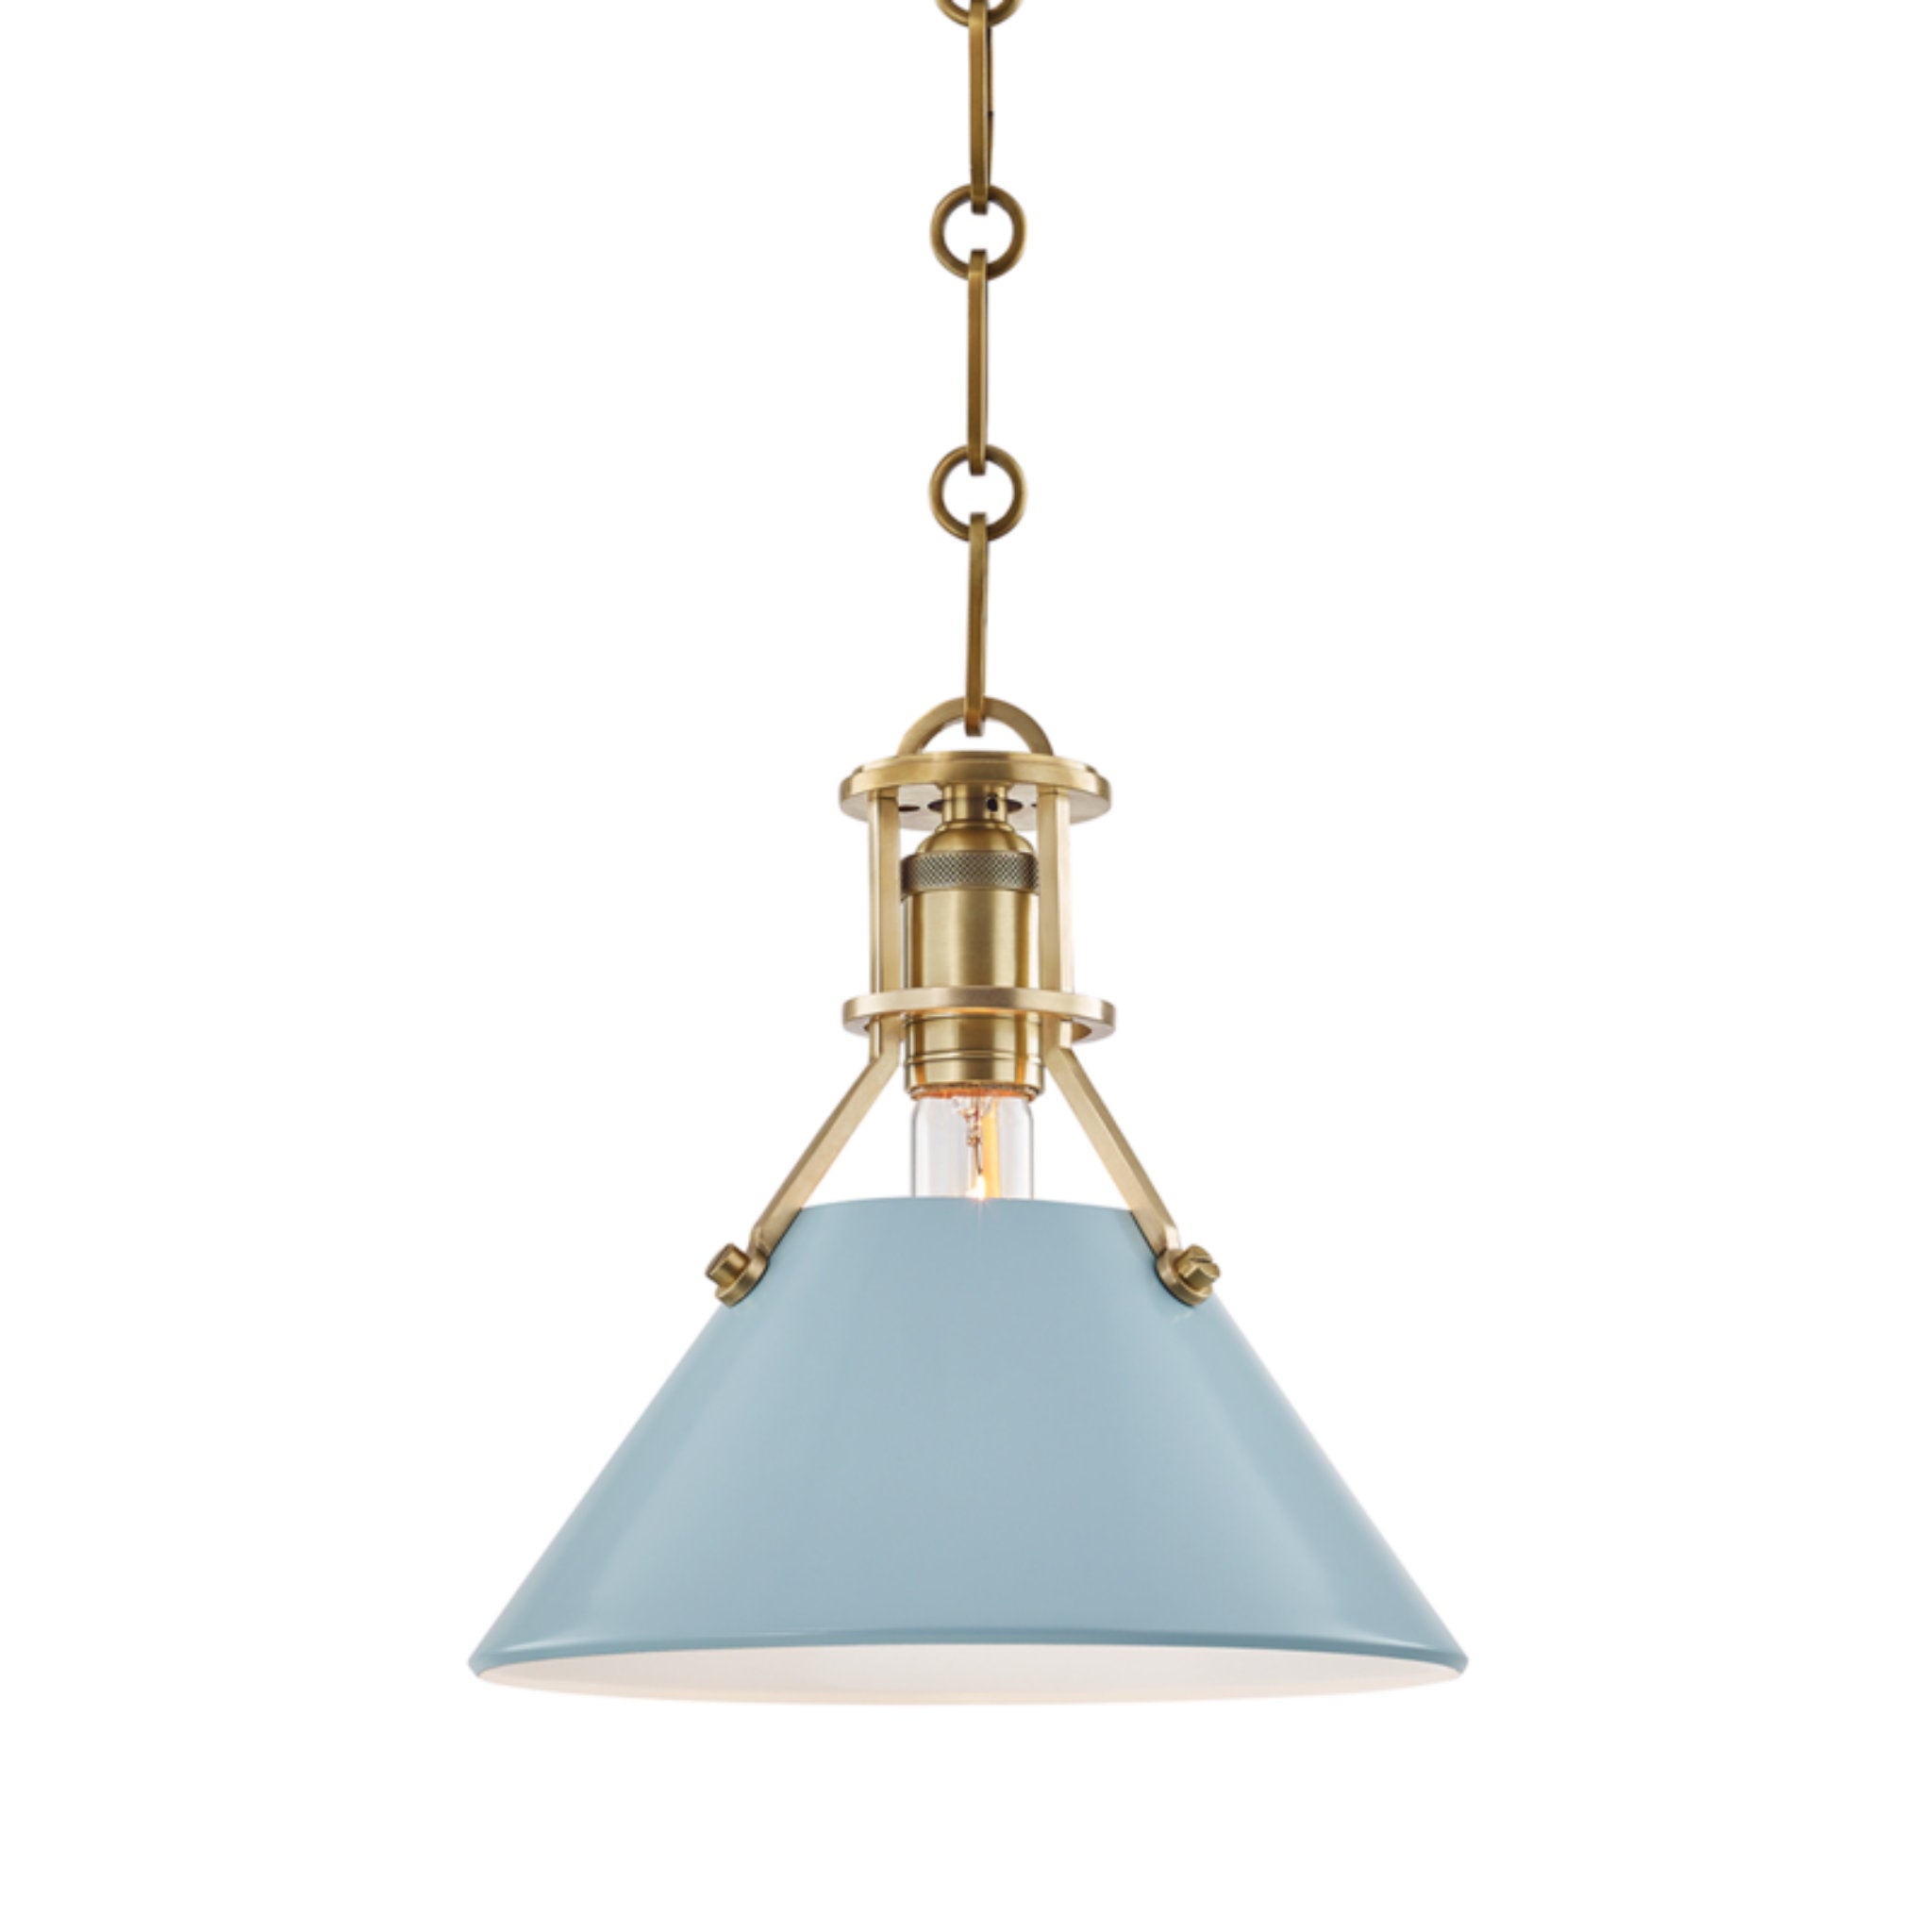 Painted No.2 1 Light Pendant in Aged Brass/blue Bird by Mark D. Sikes